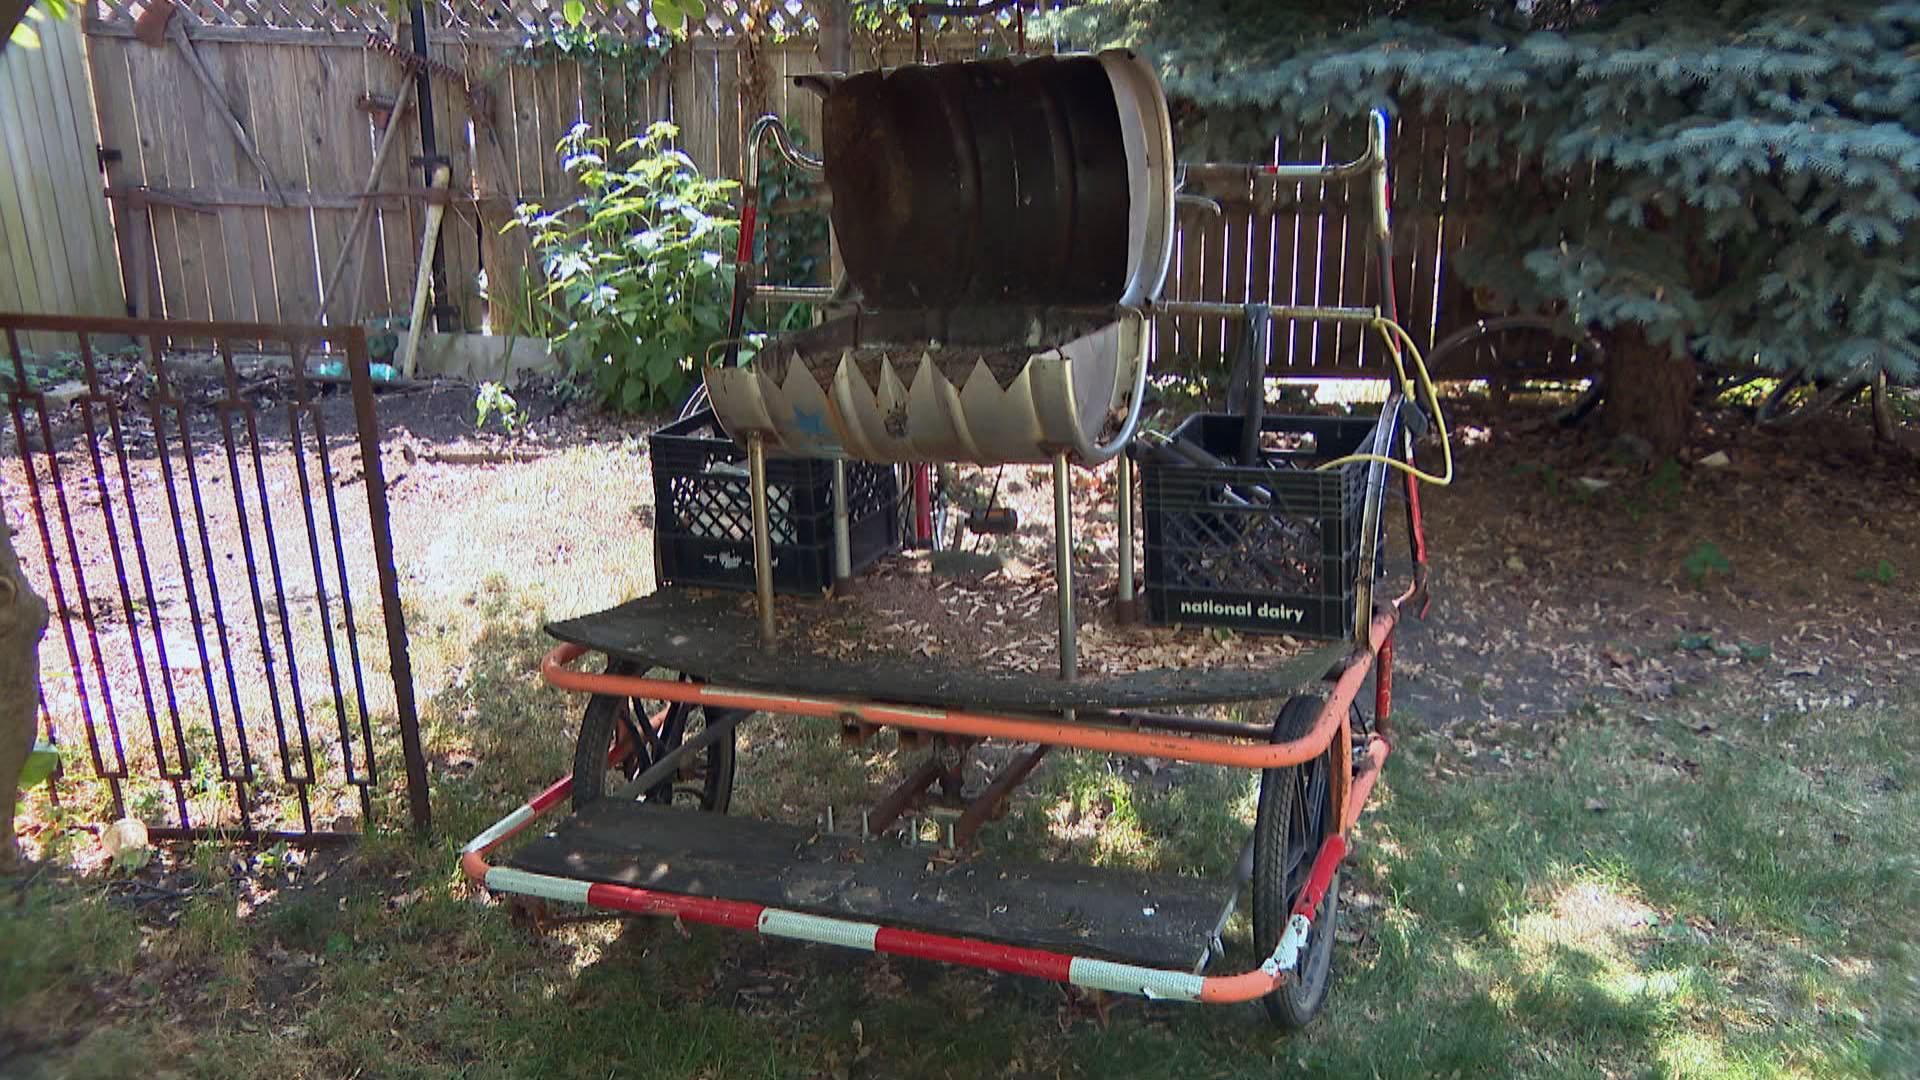 Cris Castellan’s “grill bike” is parked in his Logan Square backyard on June 11. The grill is a recycled beer keg. (WTTW News)